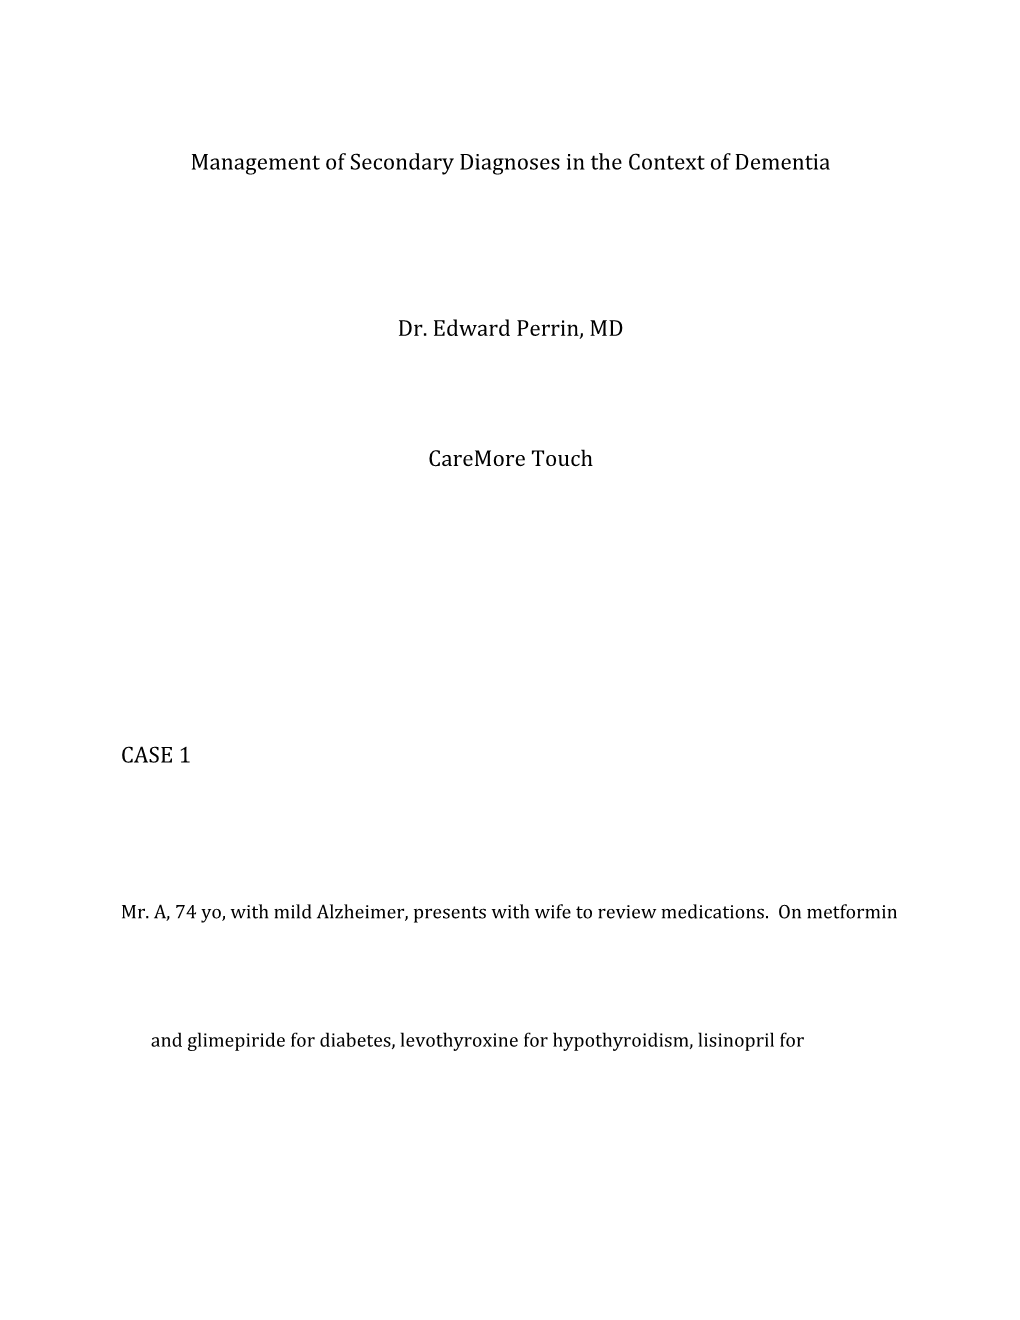 Management of Secondary Diagnoses in the Context of Dementia